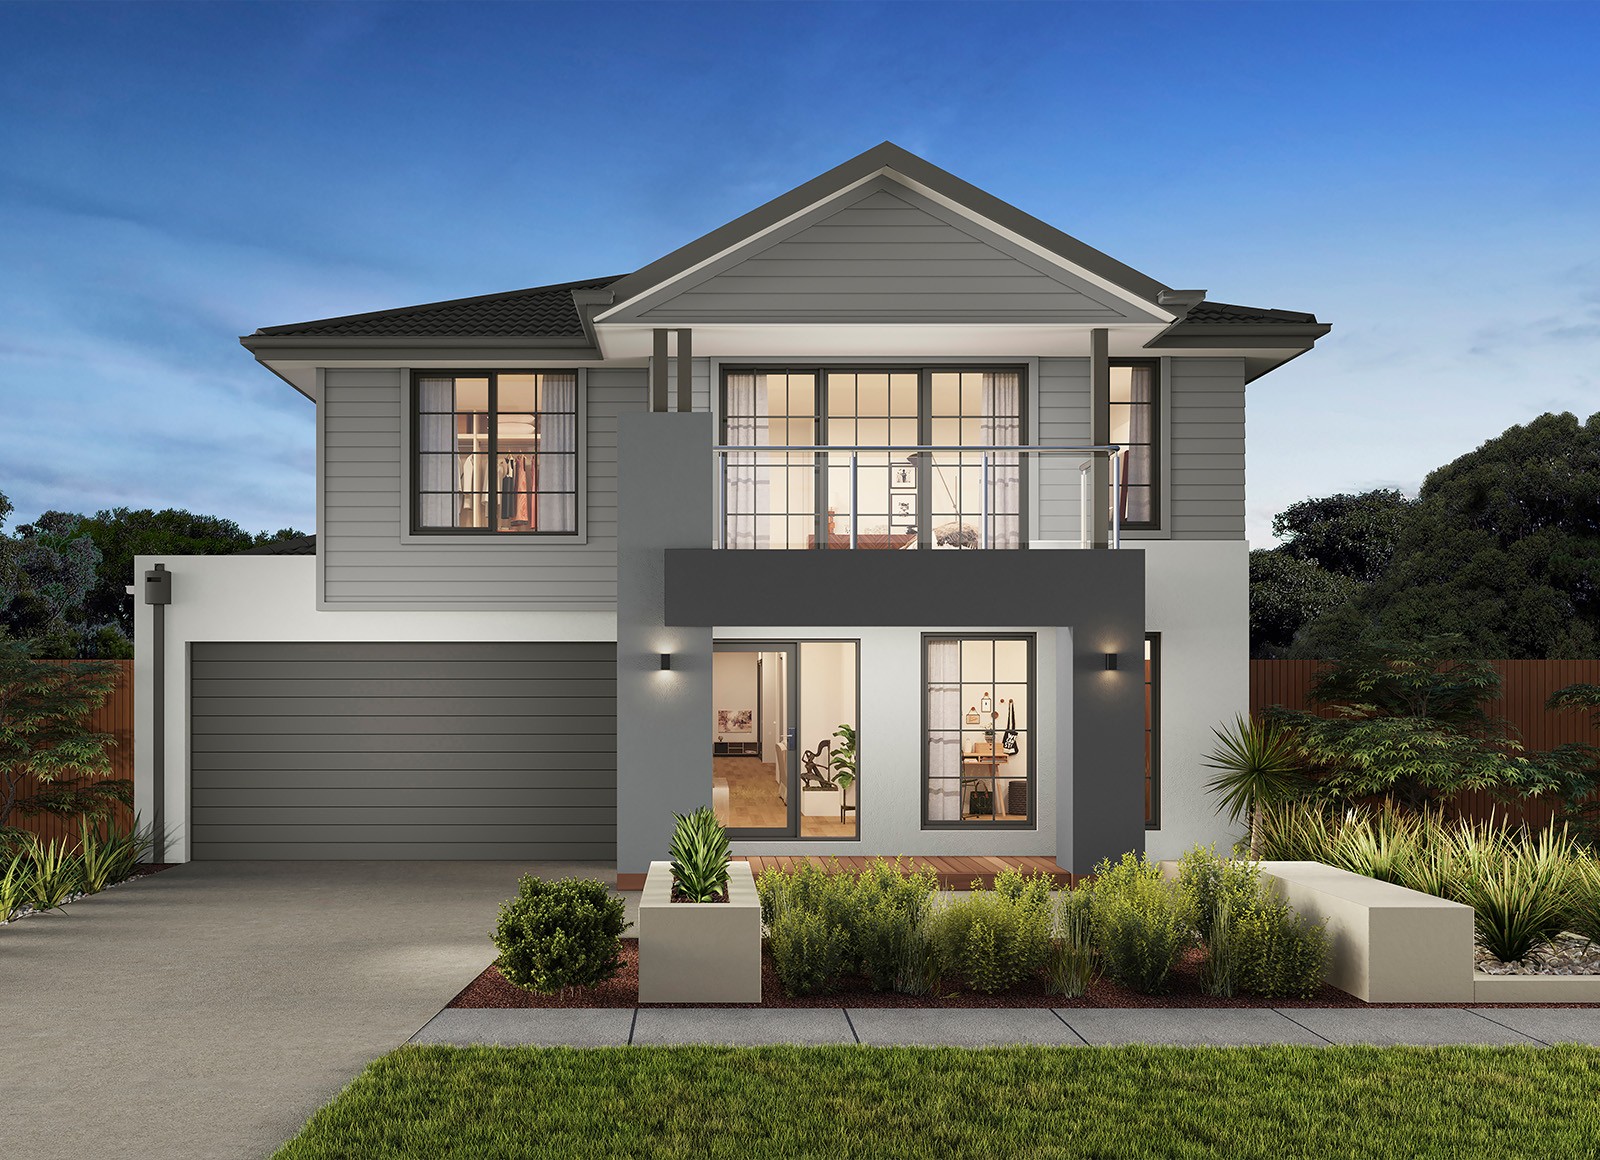 Meet our Illawarra Grand Deluxe 45, the Perfect Multi-Generational Family Home. 